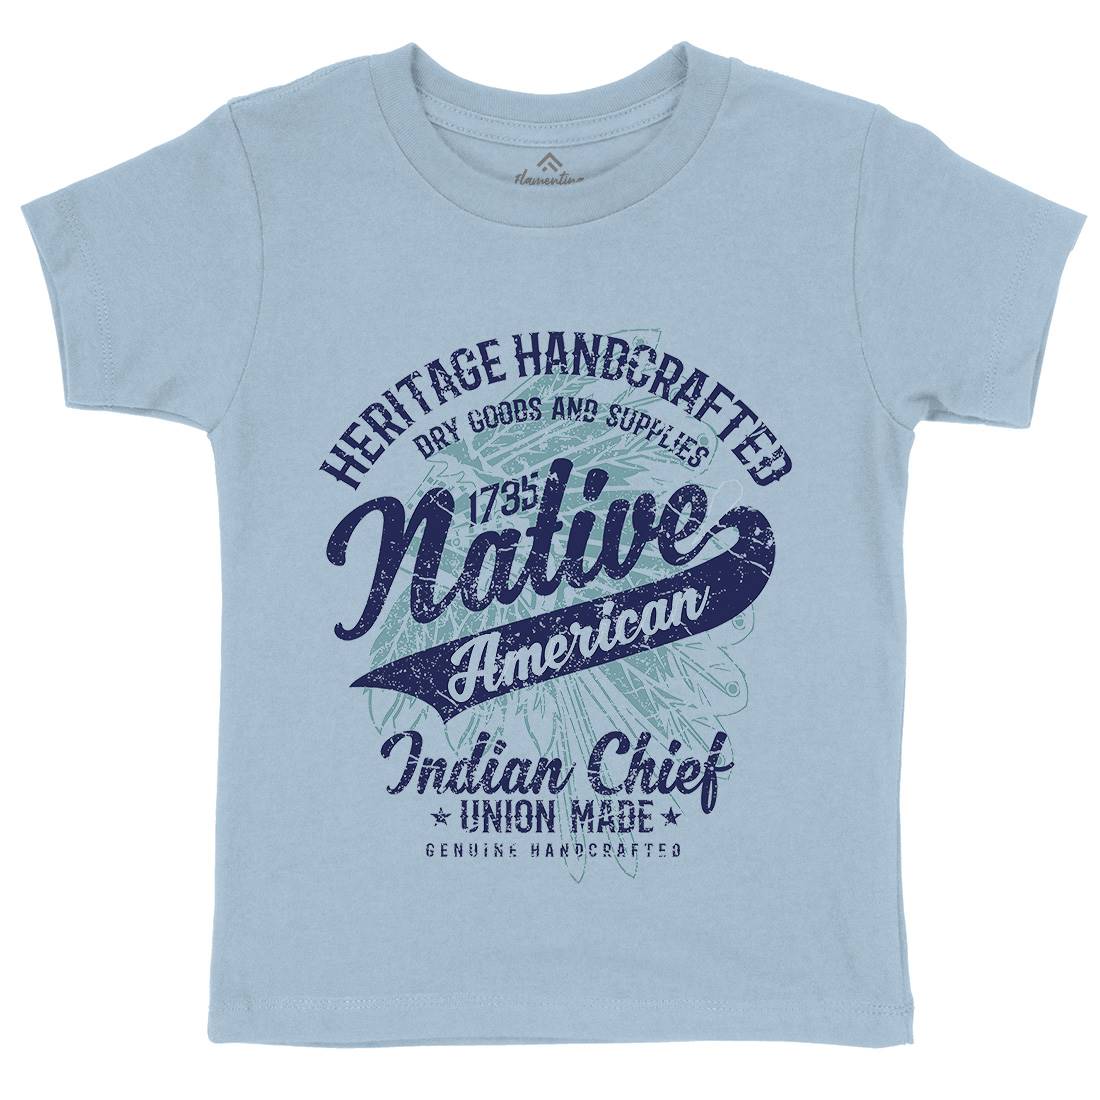 Native American Kids Crew Neck T-Shirt Motorcycles A094